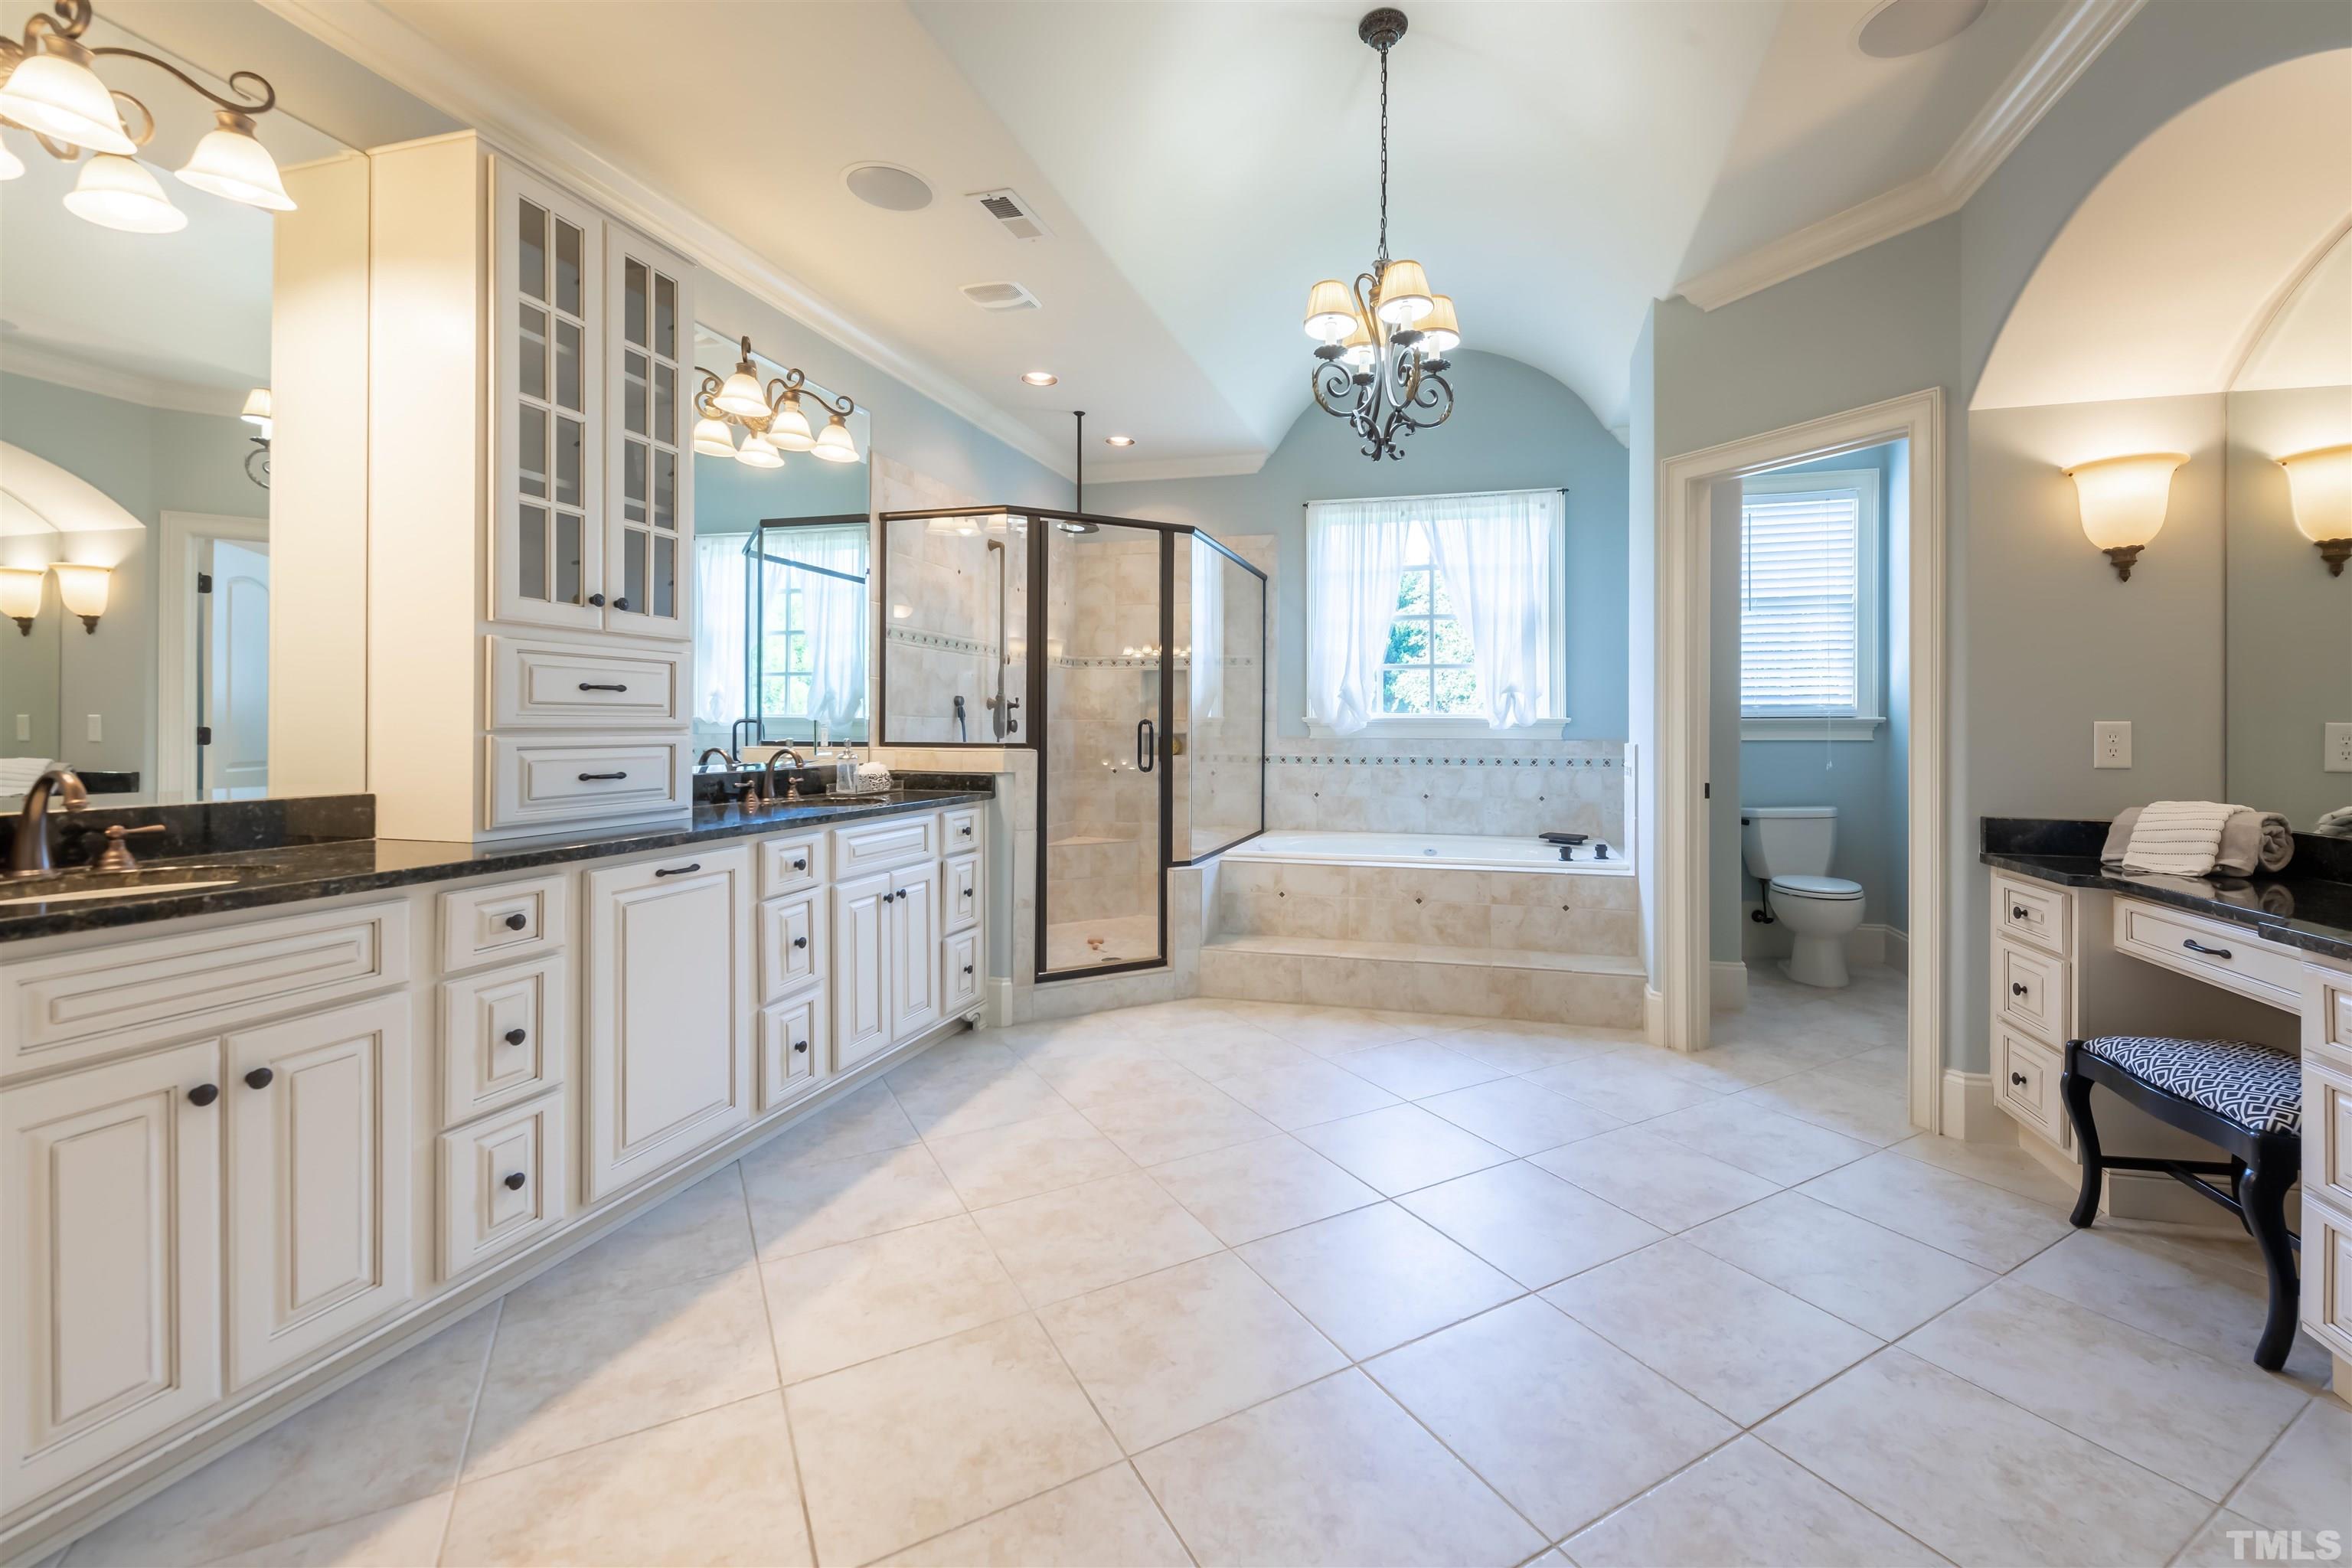 The spa-like master bath is luxurious and functional.  A large vanity with 2 sinks is divided with extra cabinetry.  There is a large walk in shower with rainhead as well as a shower arm.   The whirlpool tub is the place to relax at the end of the day.